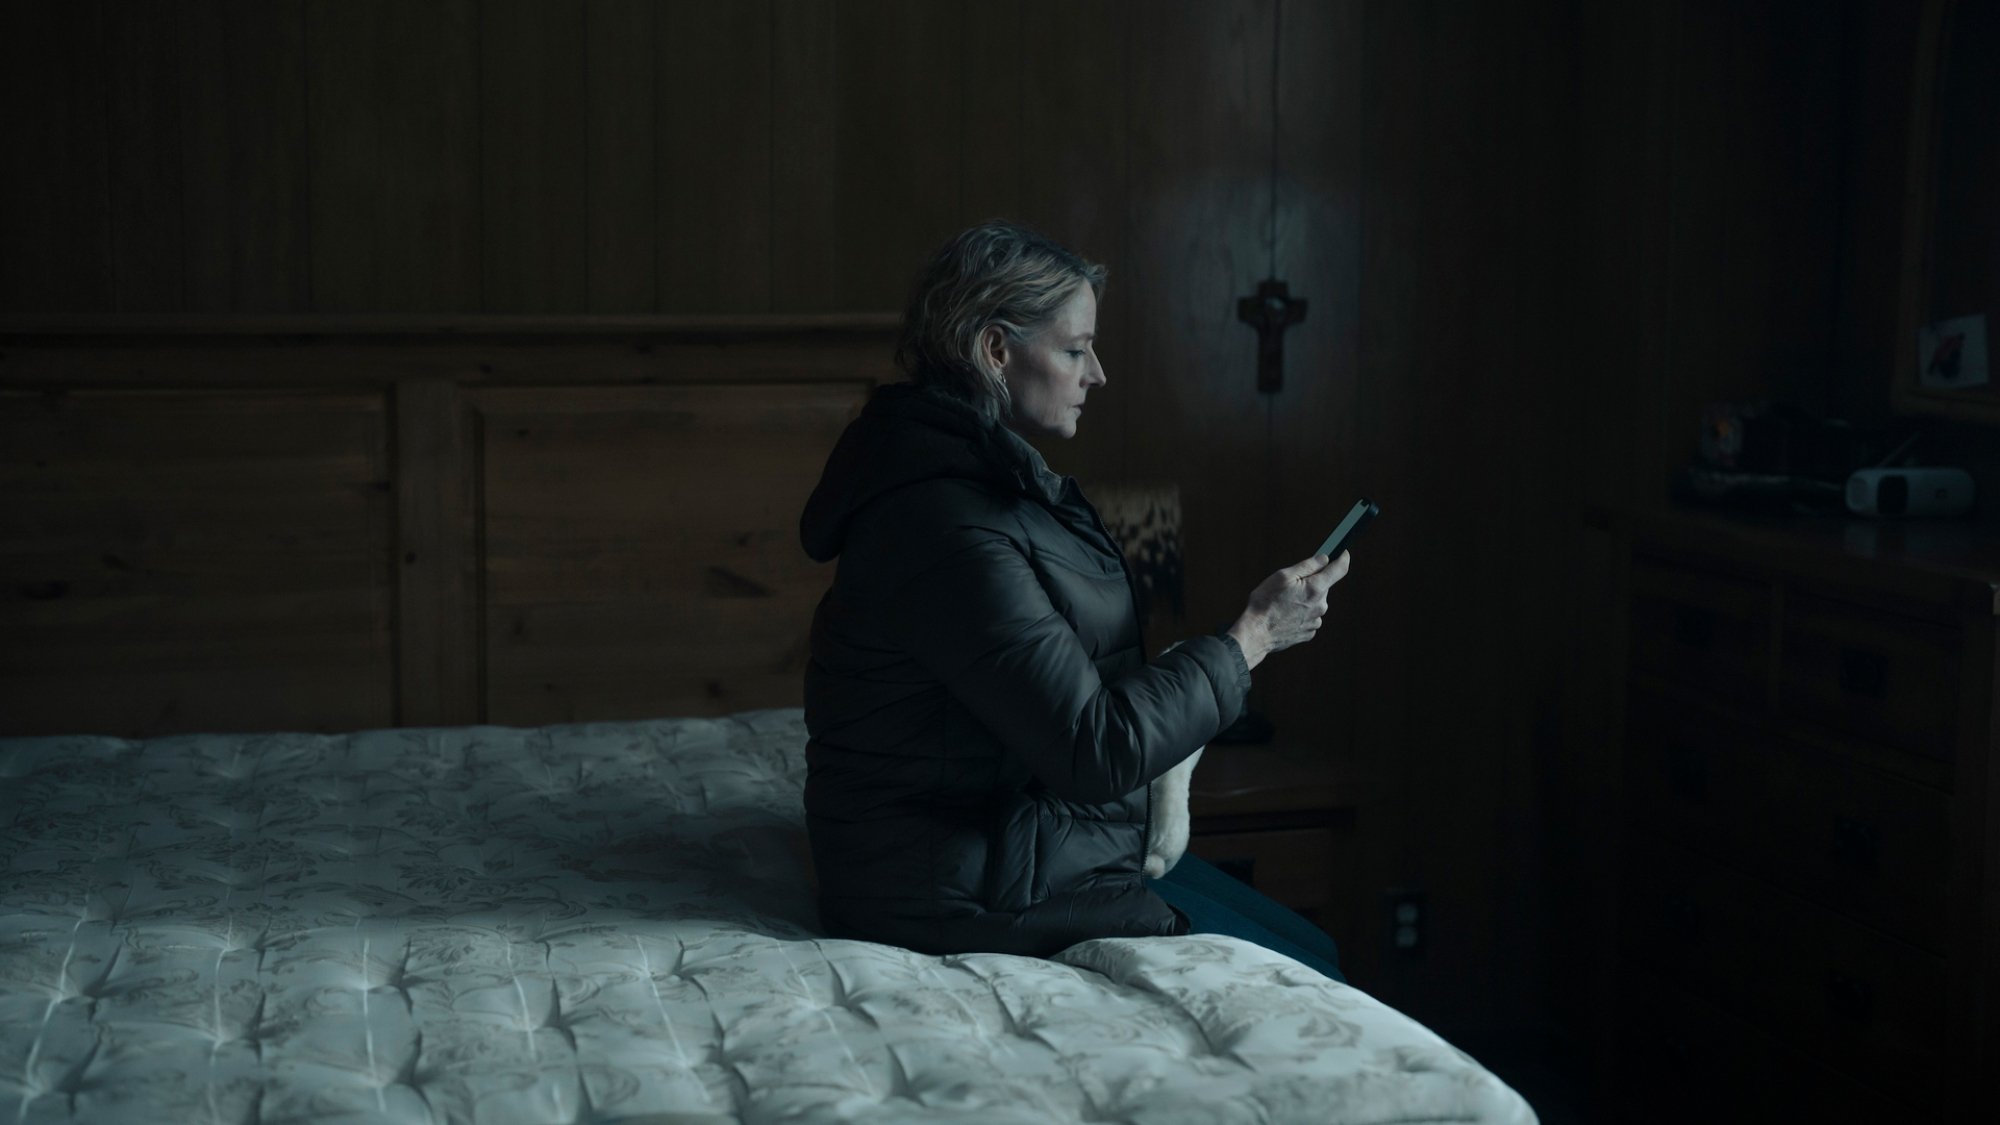 Jodie Foster sits on a stripped bed holding a phone.